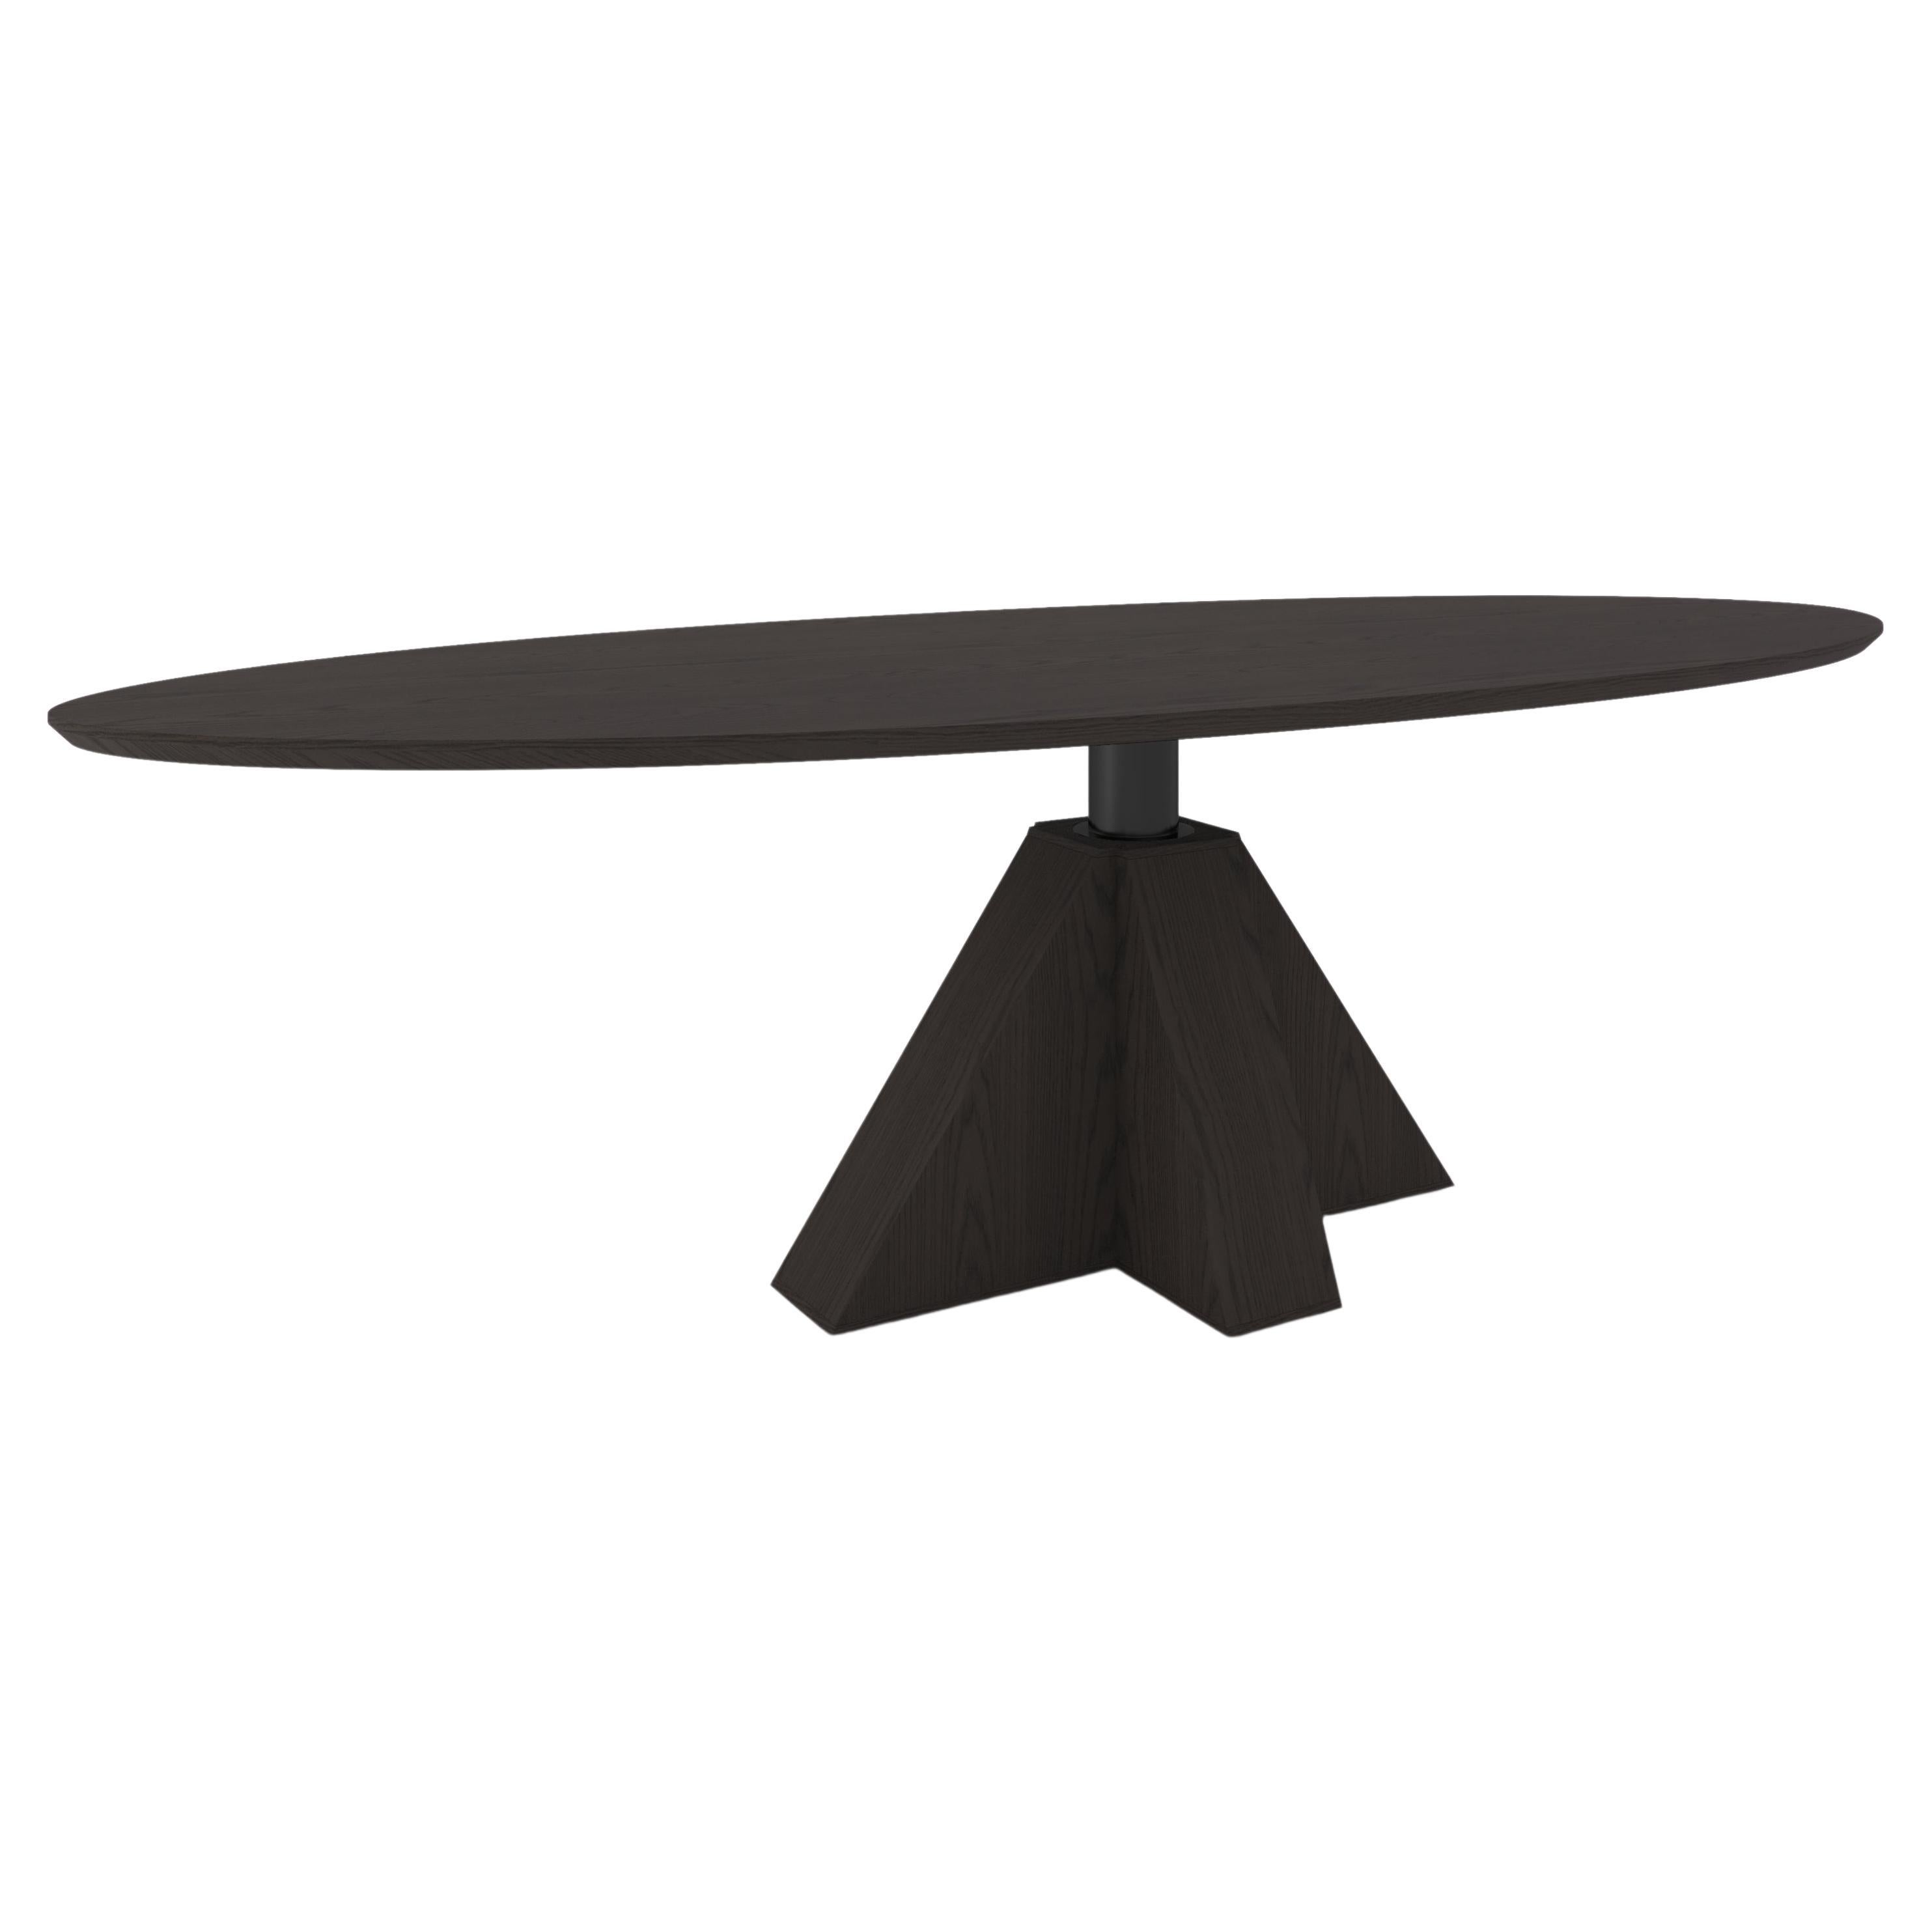 M-Oval Table by Daniel Boddam, 60" x 36", Smoked or Stained Oak For Sale